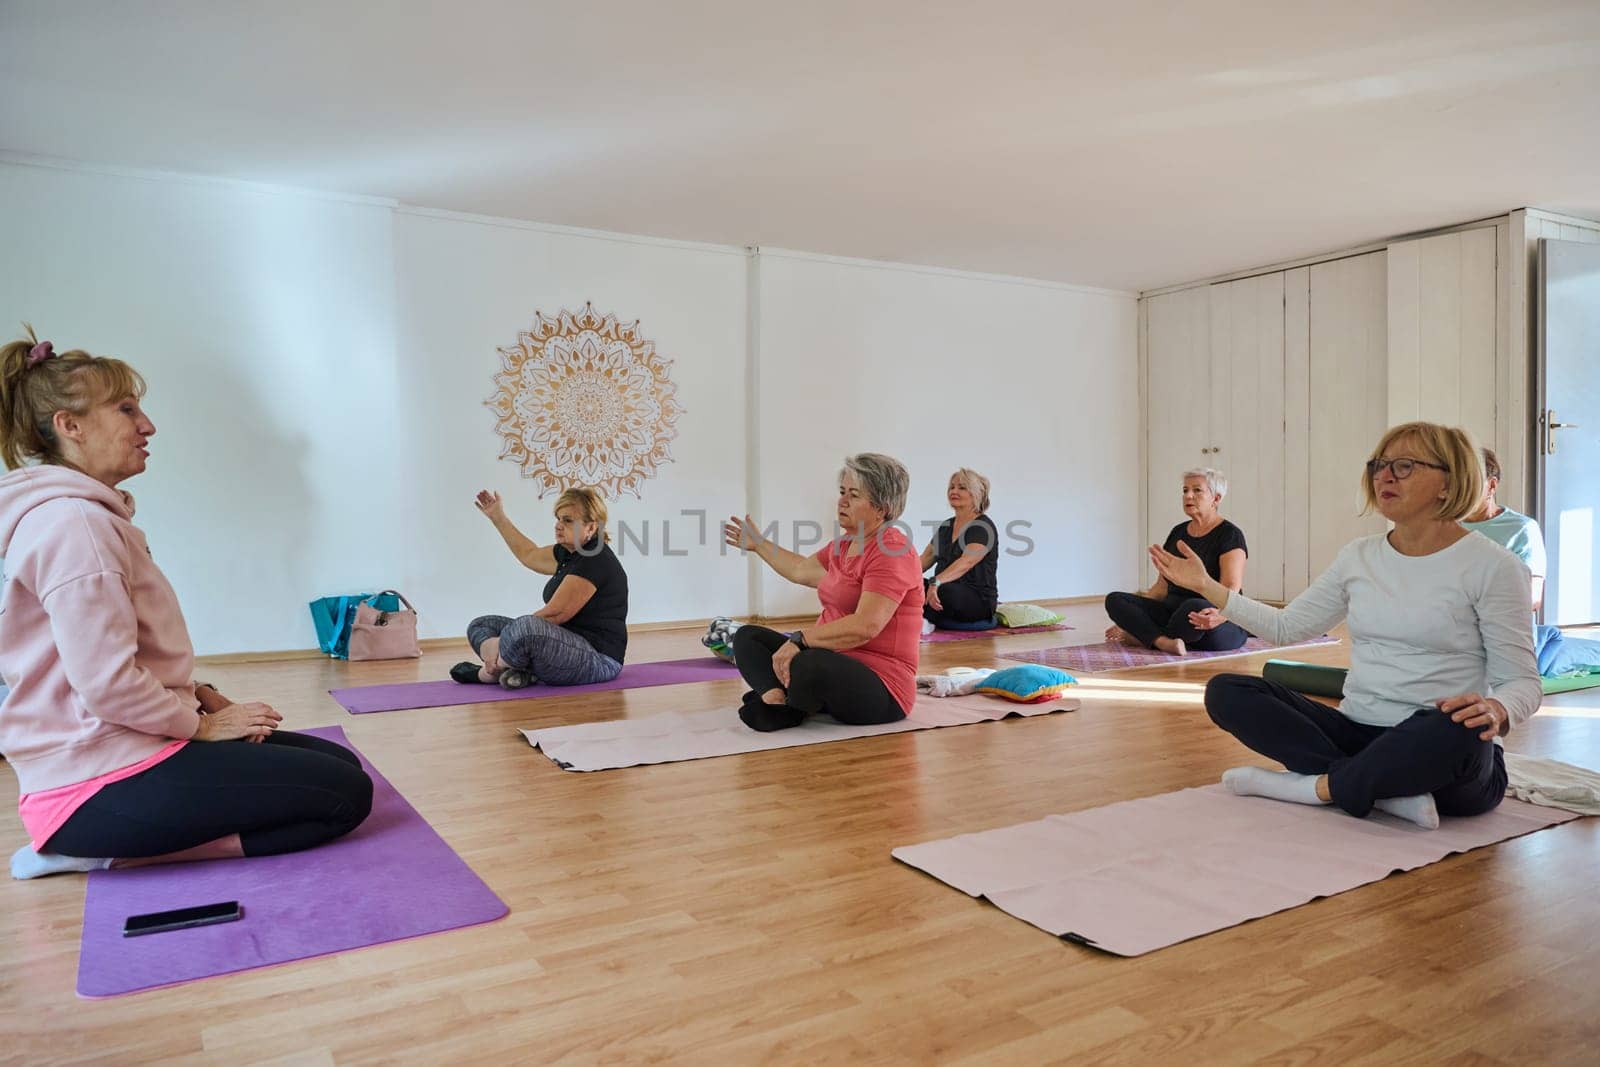 A group of senior women engage in various yoga exercises, including neck, back, and leg stretches, under the guidance of a trainer in a sunlit space, promoting well-being and harmony.